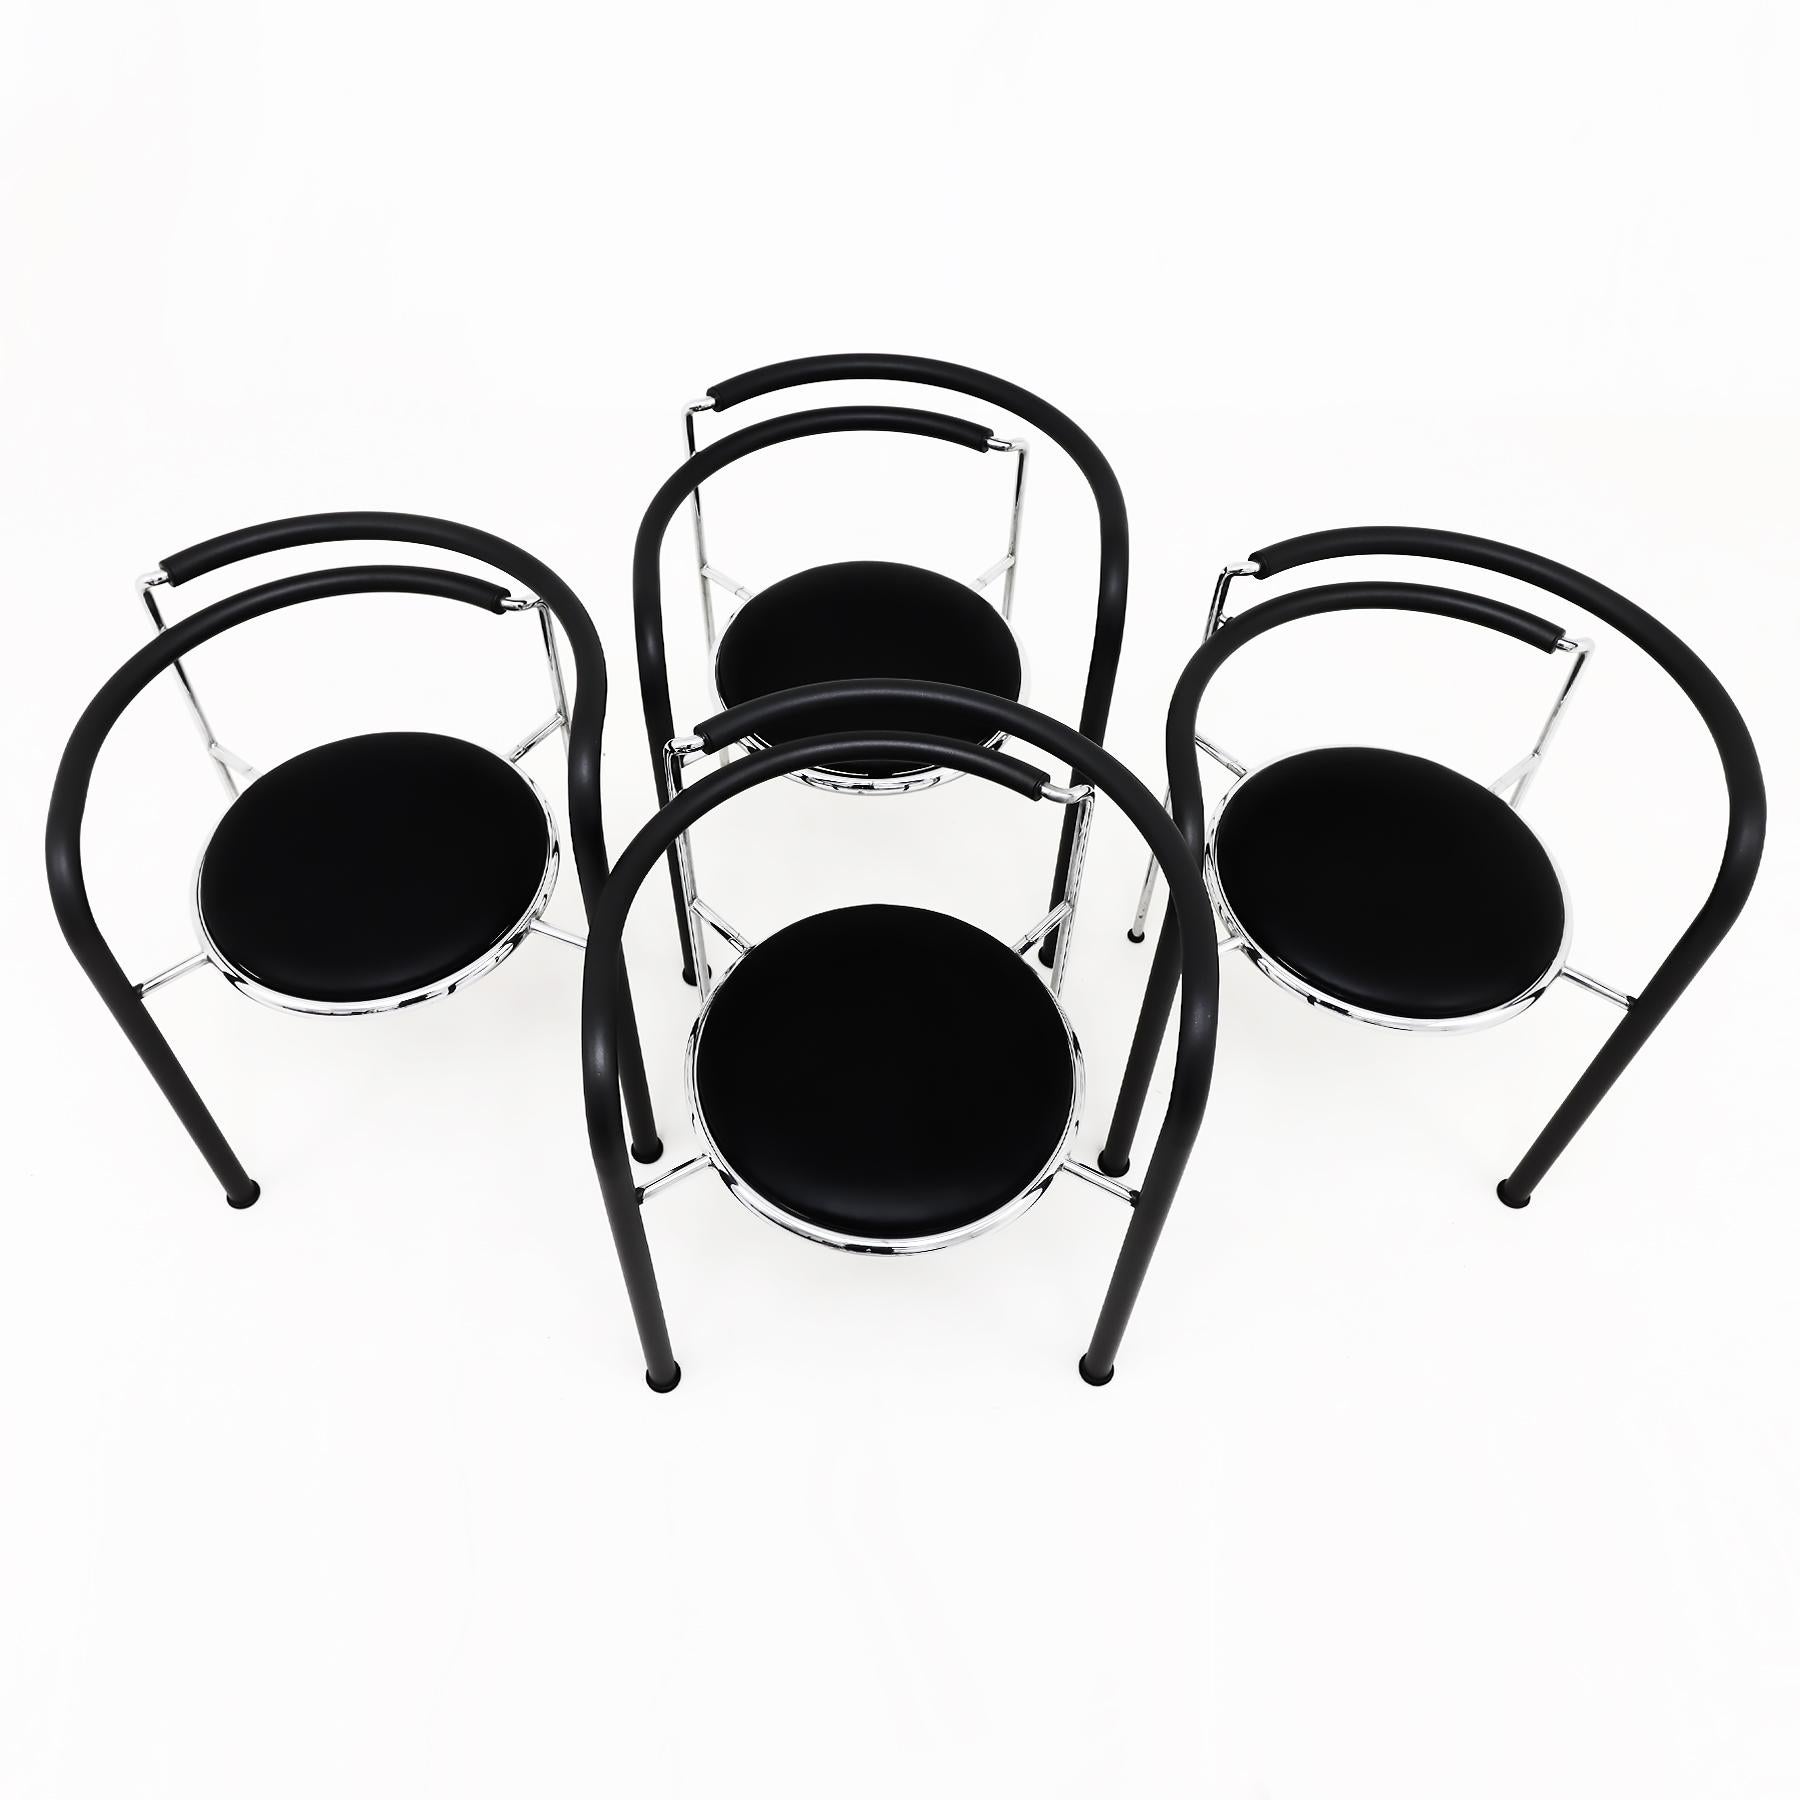 A set of 4 rare and beautiful Rud Thygesen and Johnny Sorensen Dark Horse chairs in chrome and black leather for Botium, 1980s.

The playful design elements of this postmodern seating group combine to make it the perfect centrepiece for any